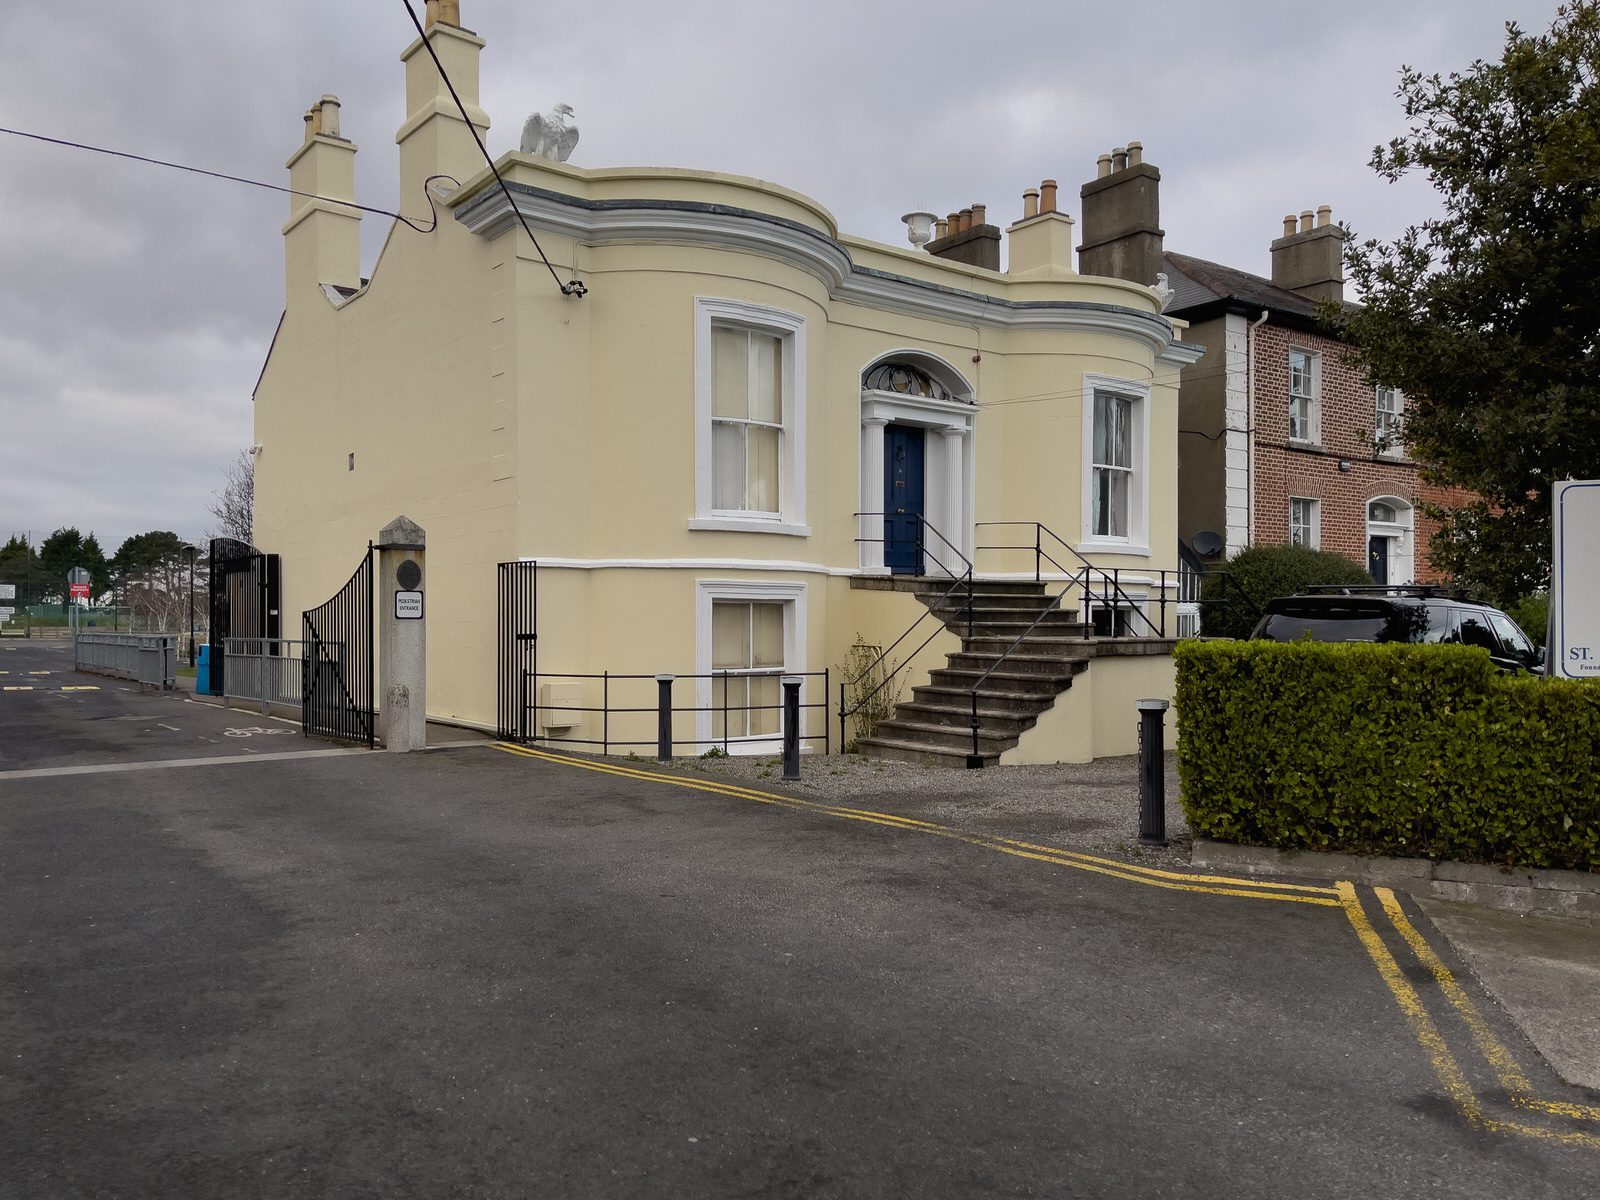 BOOTERSTOWN AVENUE 007